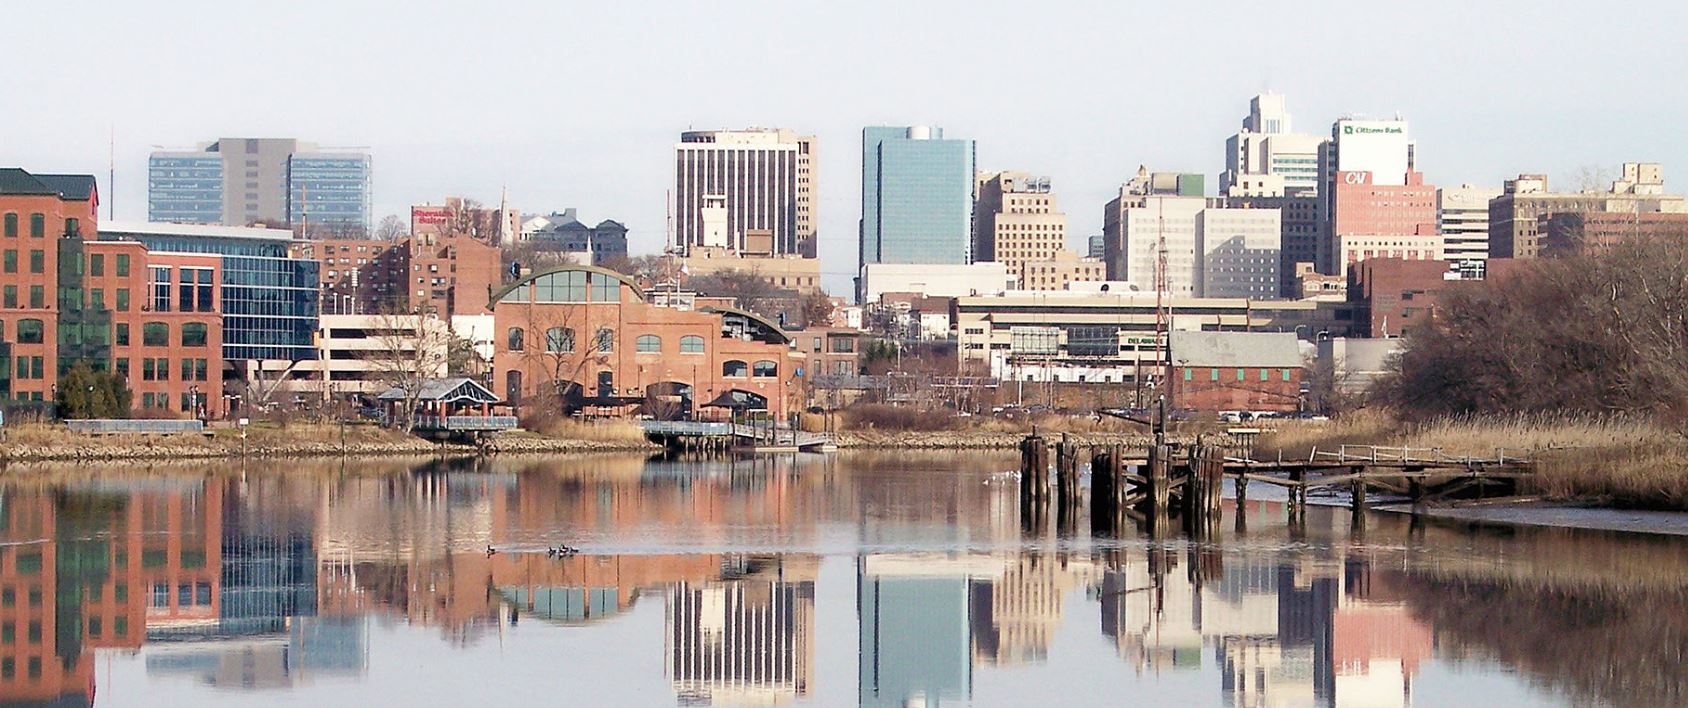 Wilmington in Delaware, the largest city in the state